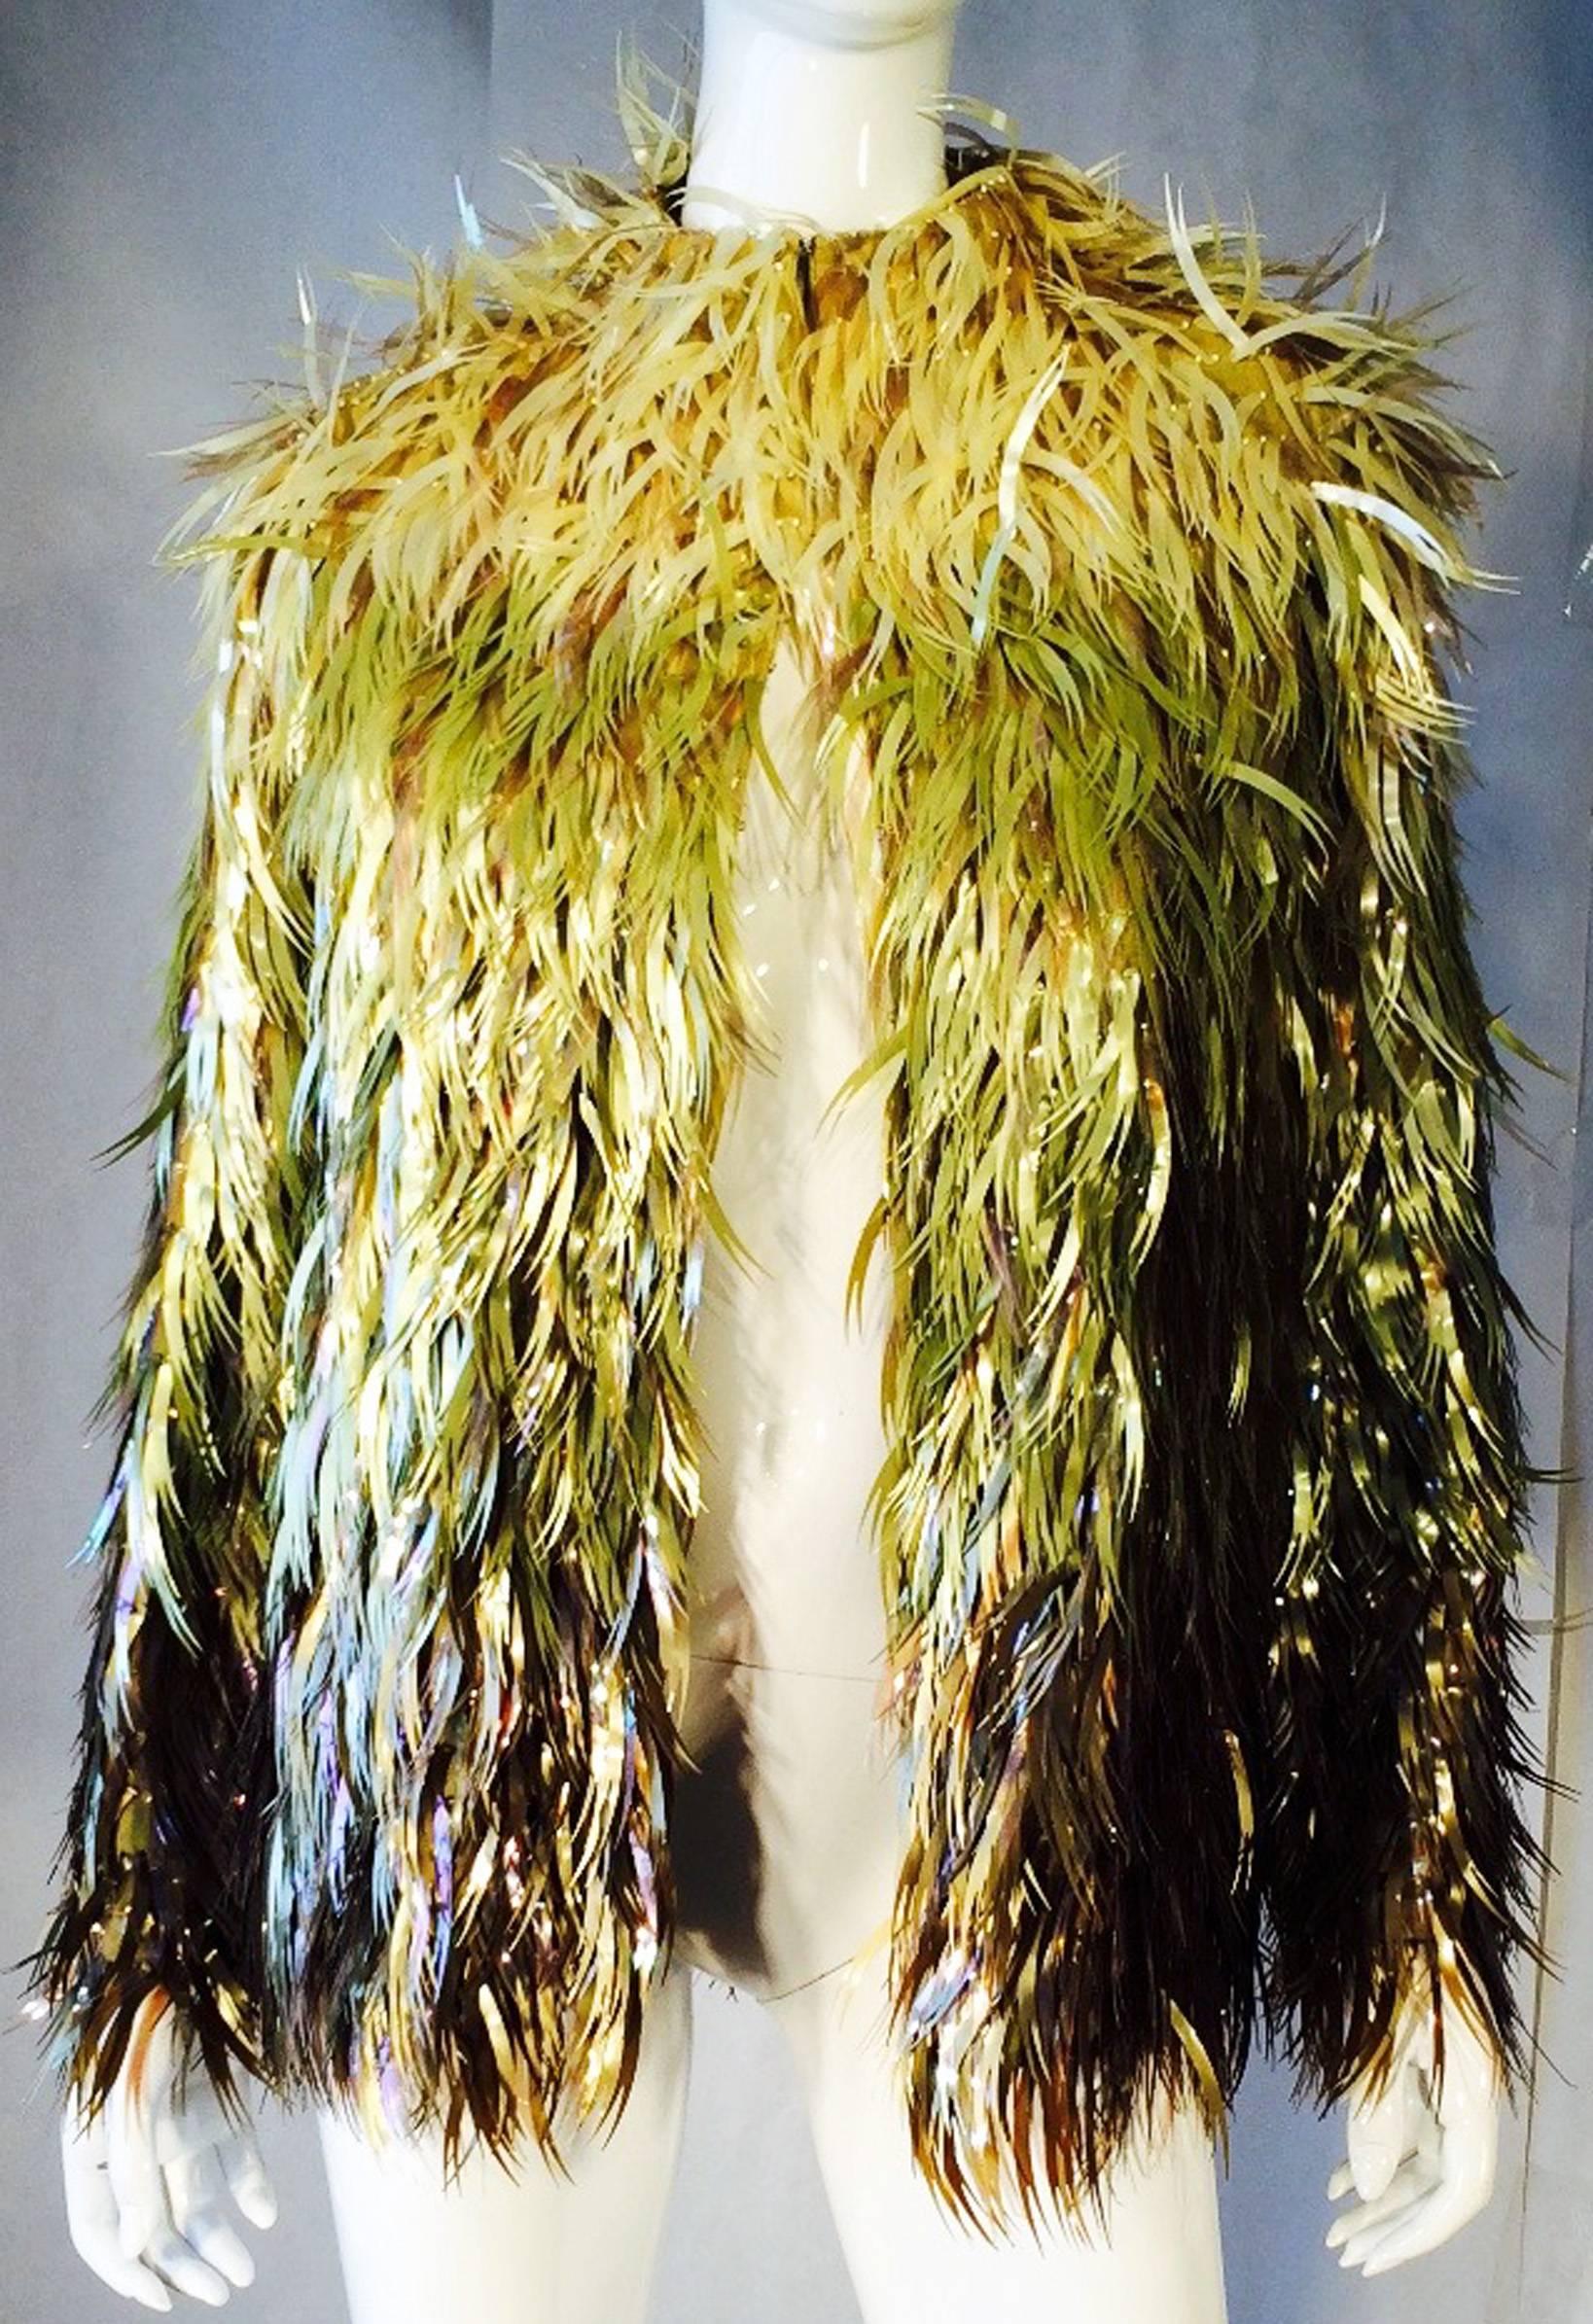 Stunning and rare Chloe faux fur jacket. Iconic item from Stella McCartney's last Chloe runway collection, Fall 2000 (named Vogue designer of the year 2000). An original and dynamic take on the faux fur jacket. Linen lined item features green ombre